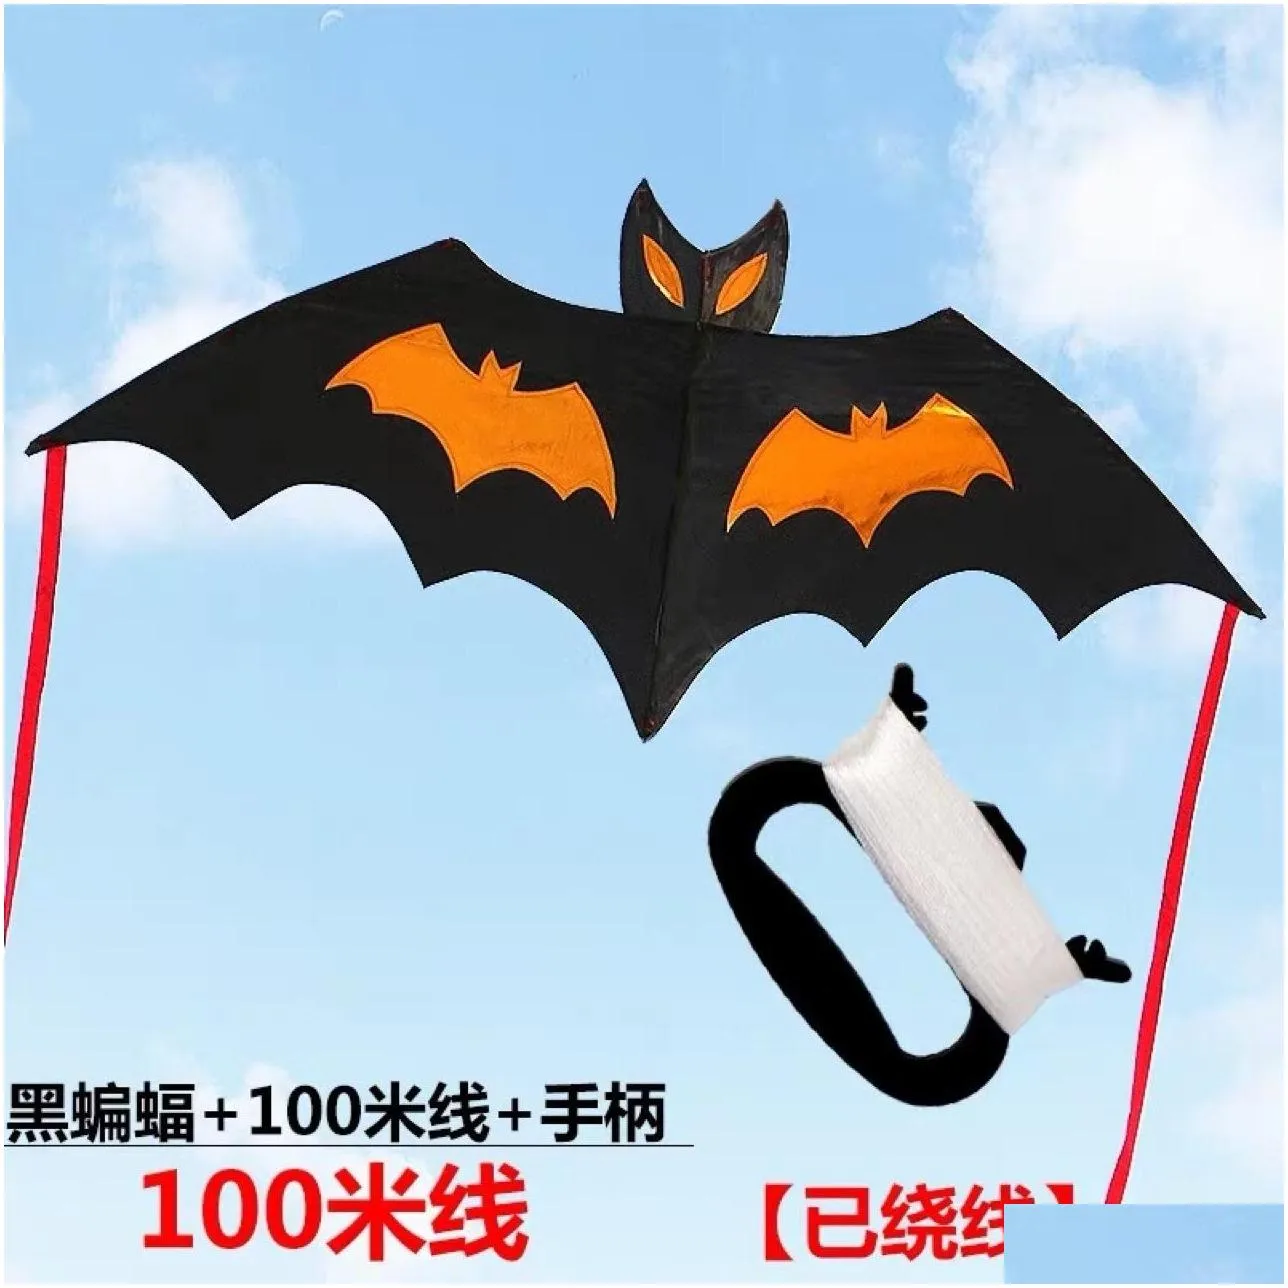 high quality 1.8 m red bat power kite resin rod with handle and line good flying toy kids